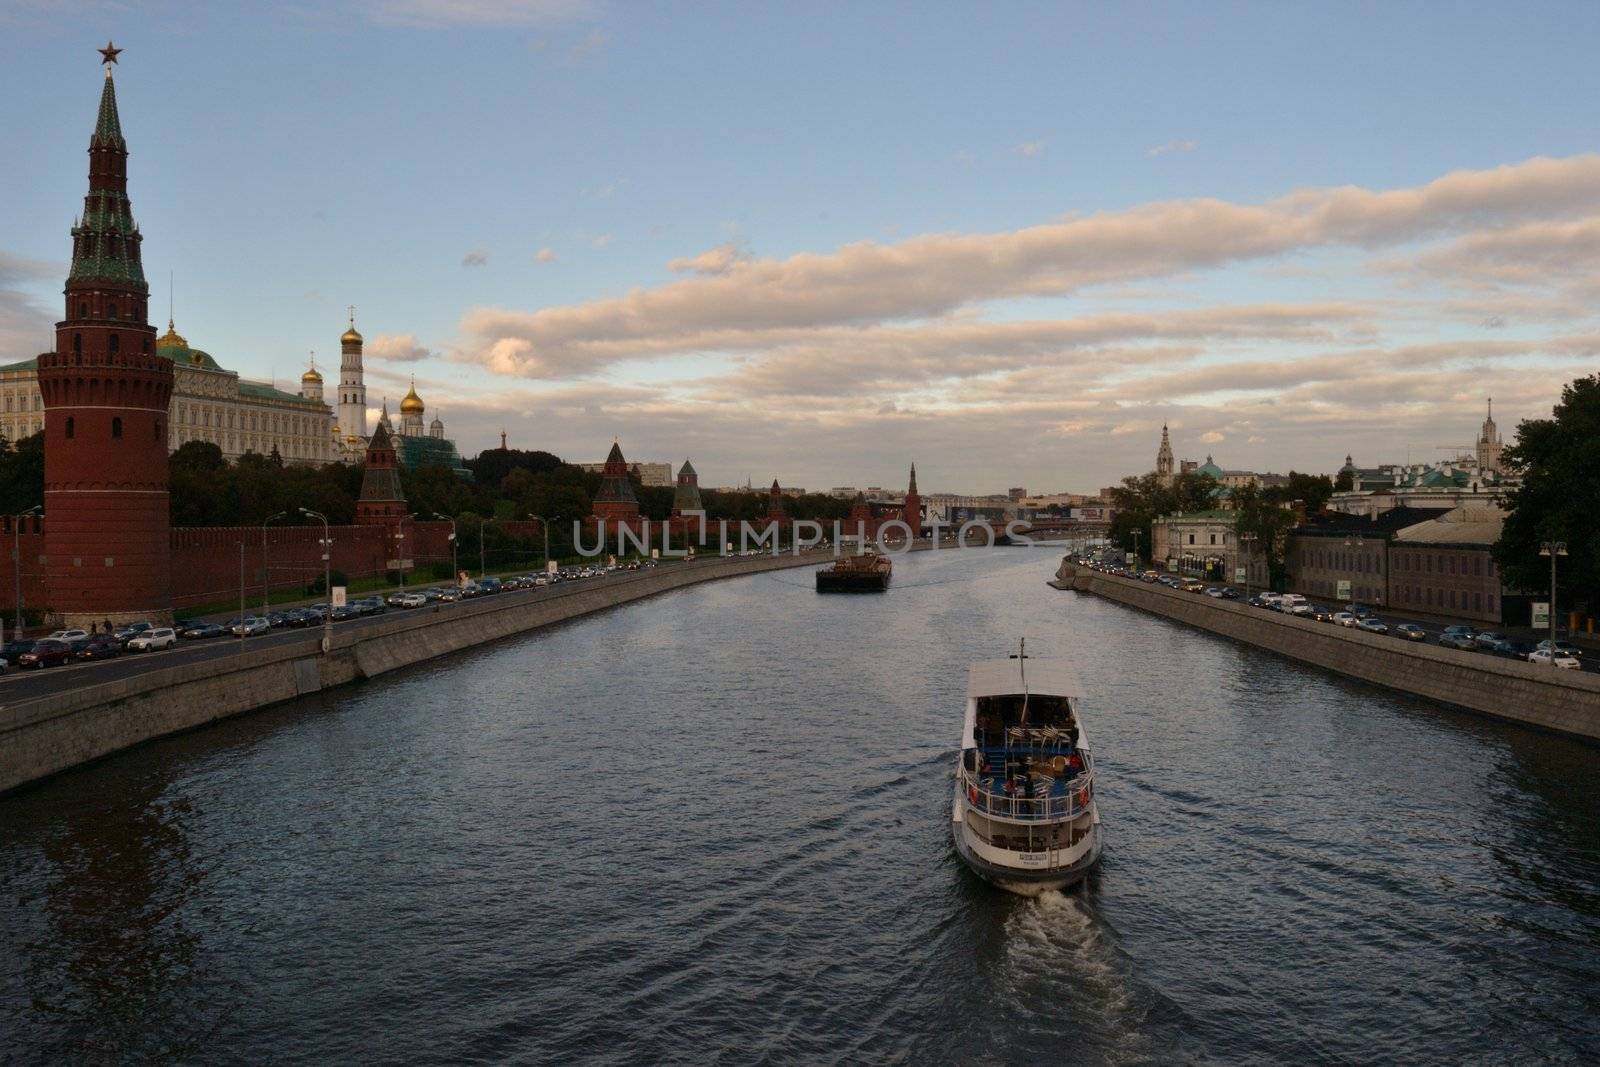 The evening view of the Moscow river